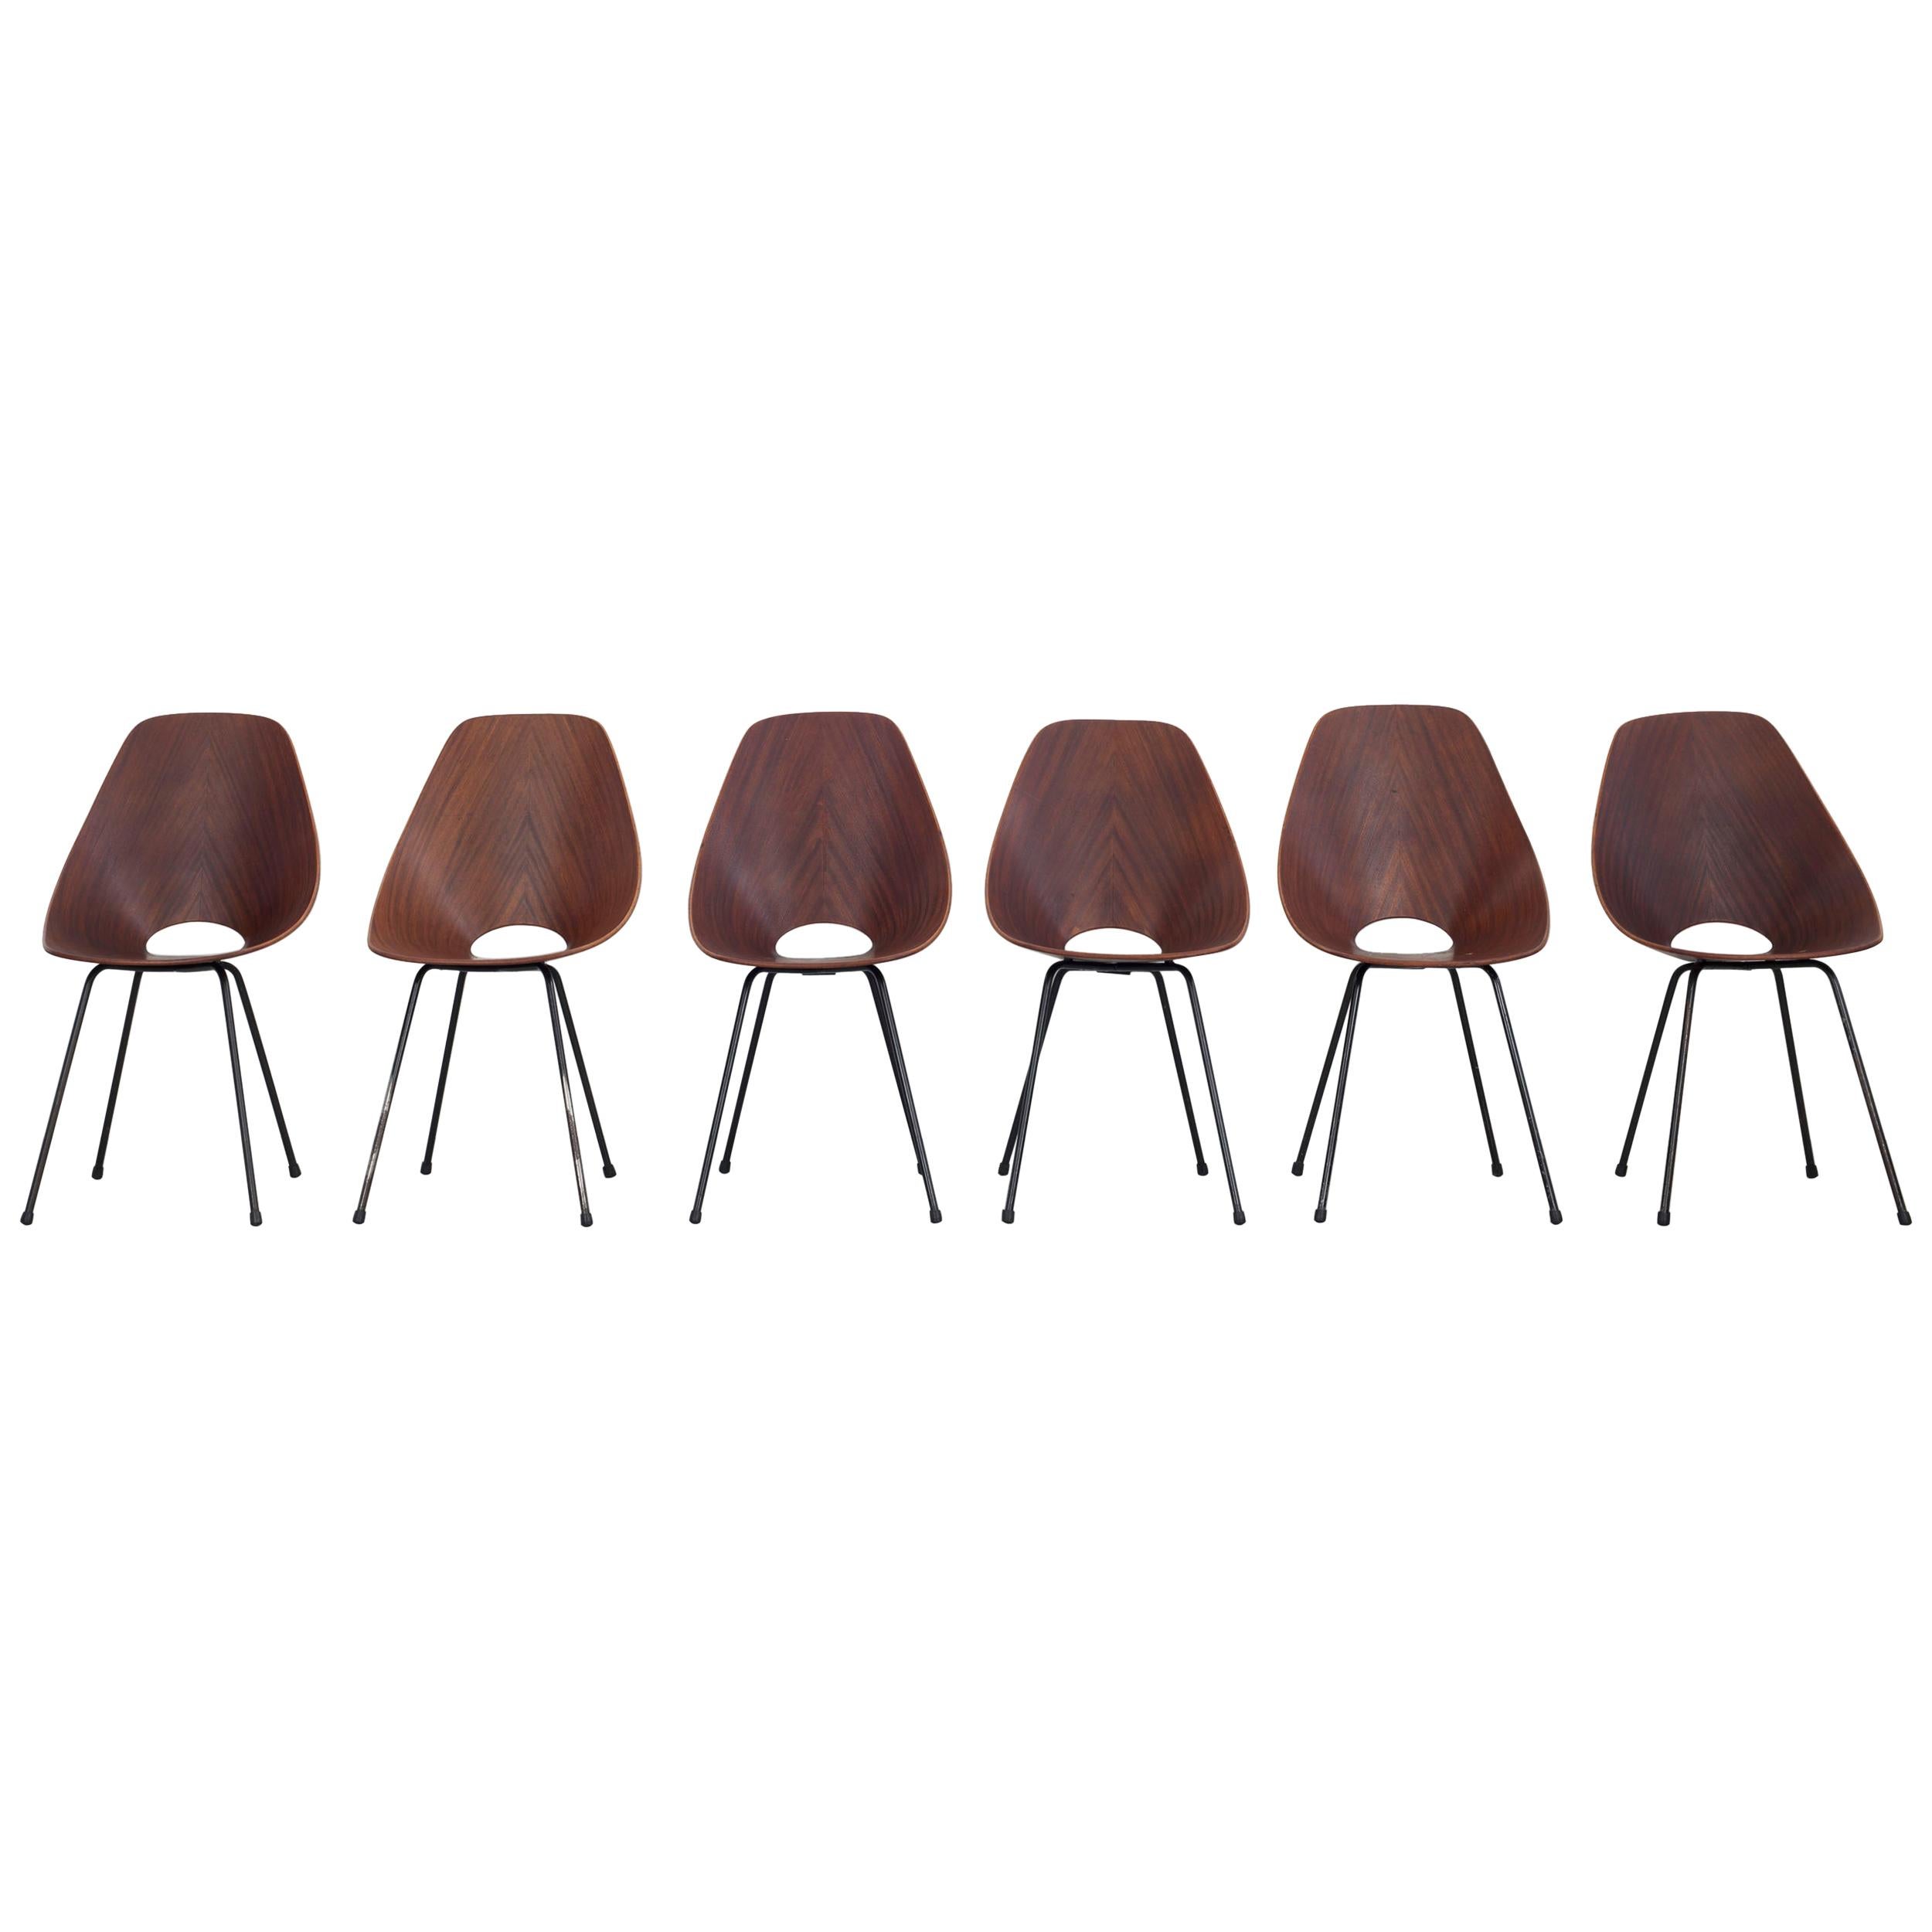 Set of 6 Vittorio Nobili Medea Plywood Side Chairs from Italy, 1956